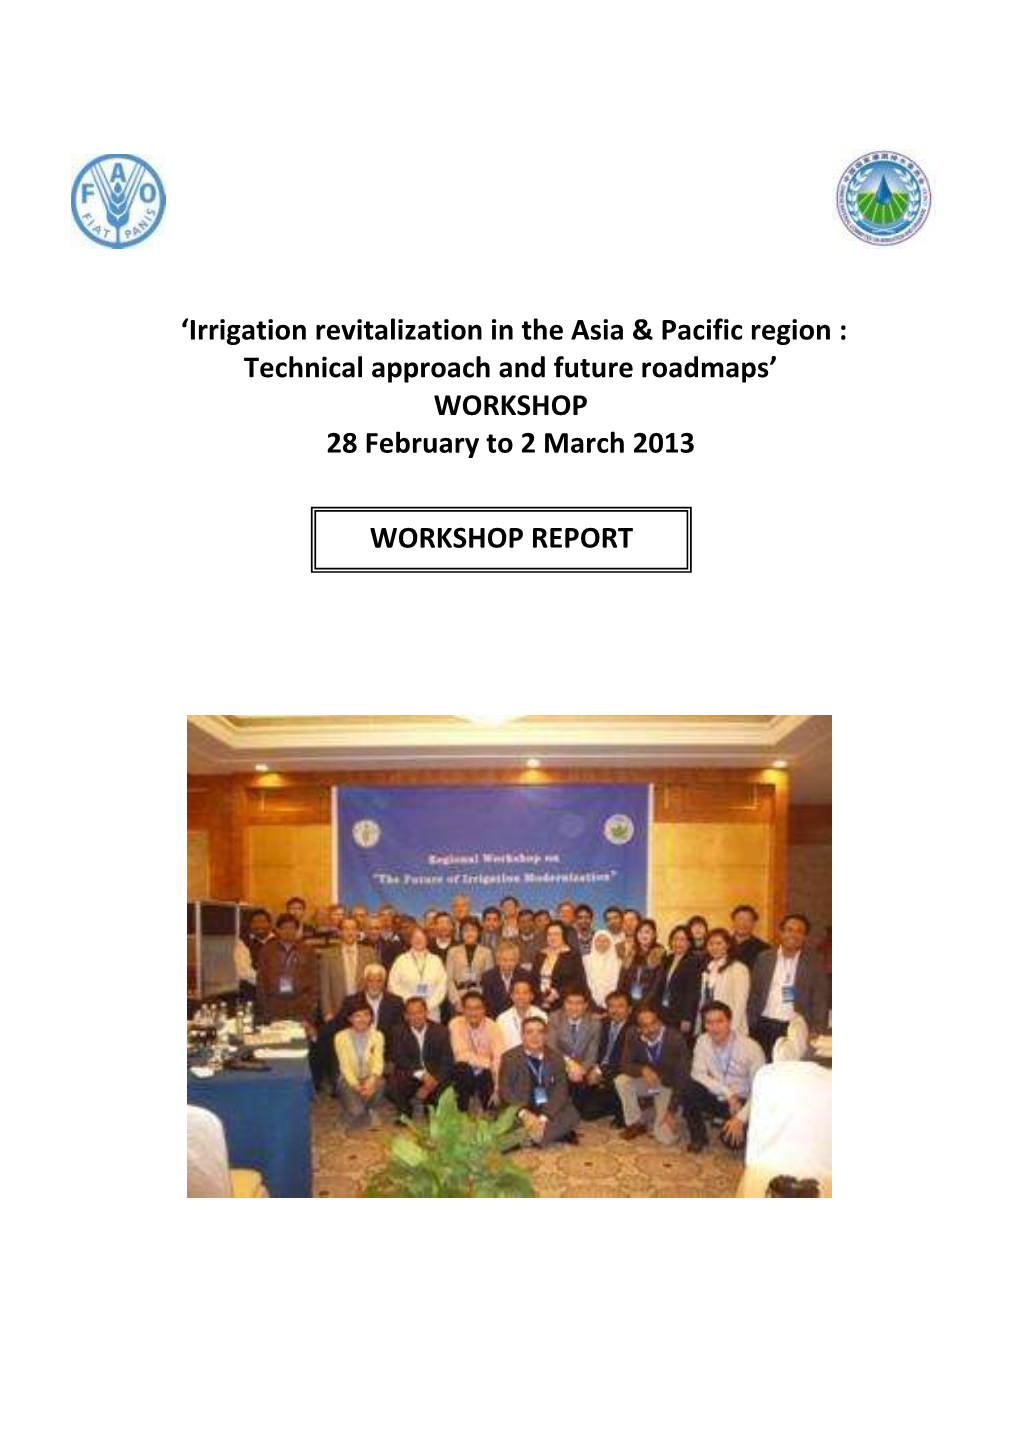 'Irrigation Revitalization in the Asia & Pacific Region : Technical Approach